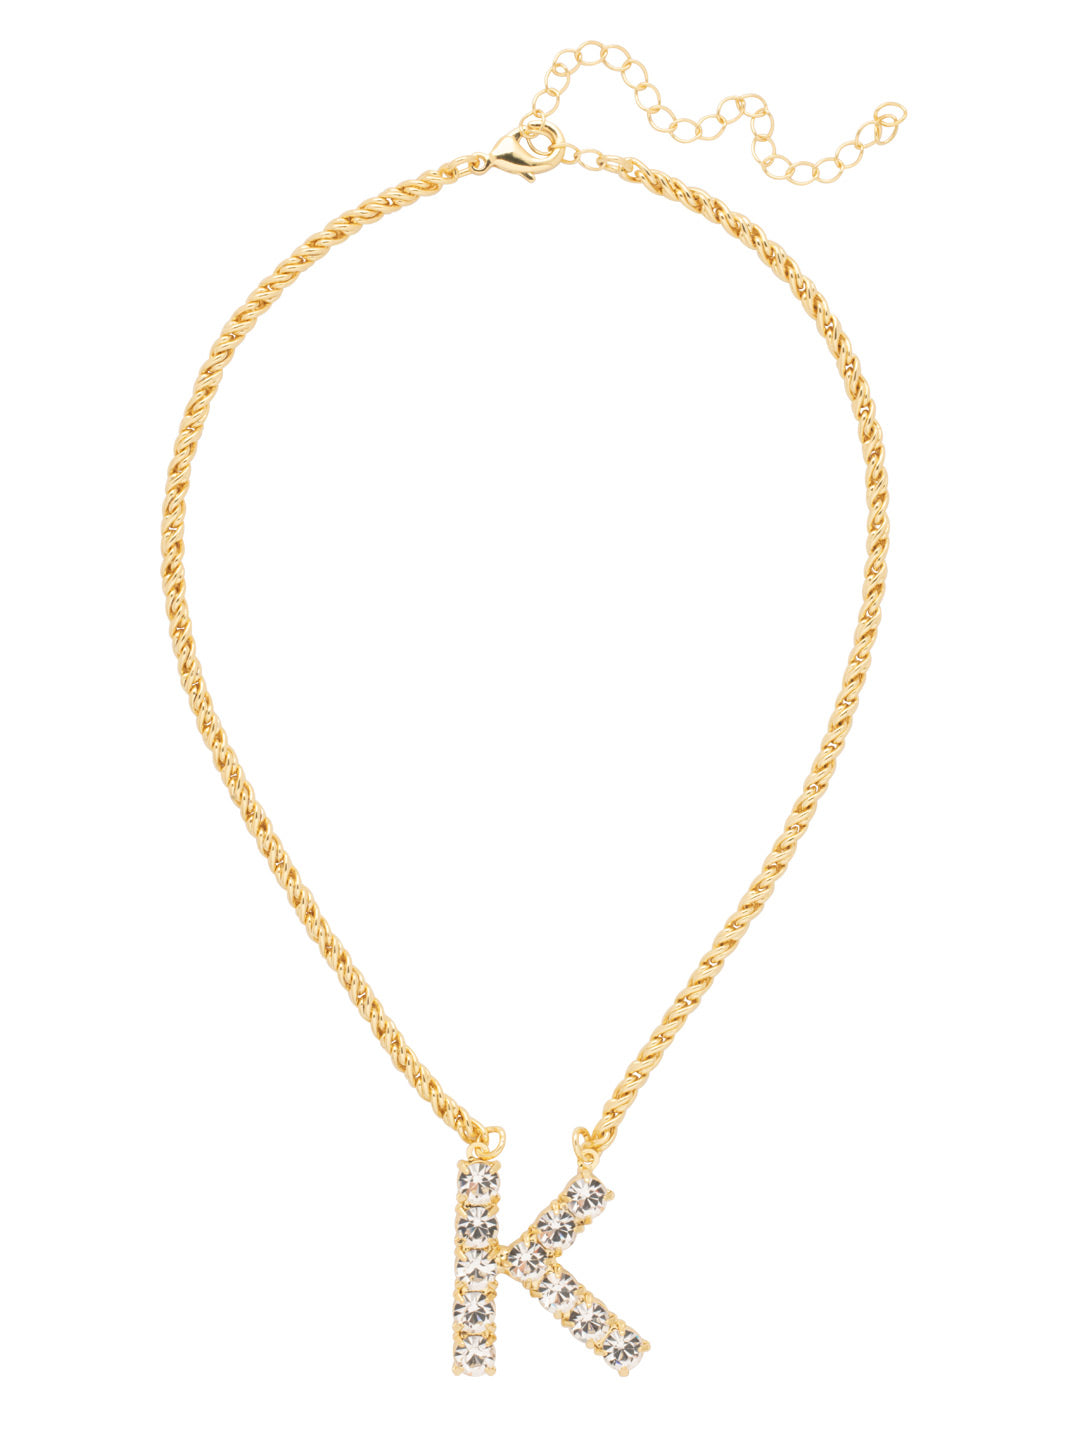 K Initial Rope Pendant Necklace - NFK30BGCRY - <p>The Initial Rope Pendant Necklace features a crystal encrusted metal monogram pendant on an adjustable rope chain, secured with a lobster claw clasp. From Sorrelli's Crystal collection in our Bright Gold-tone finish.</p>